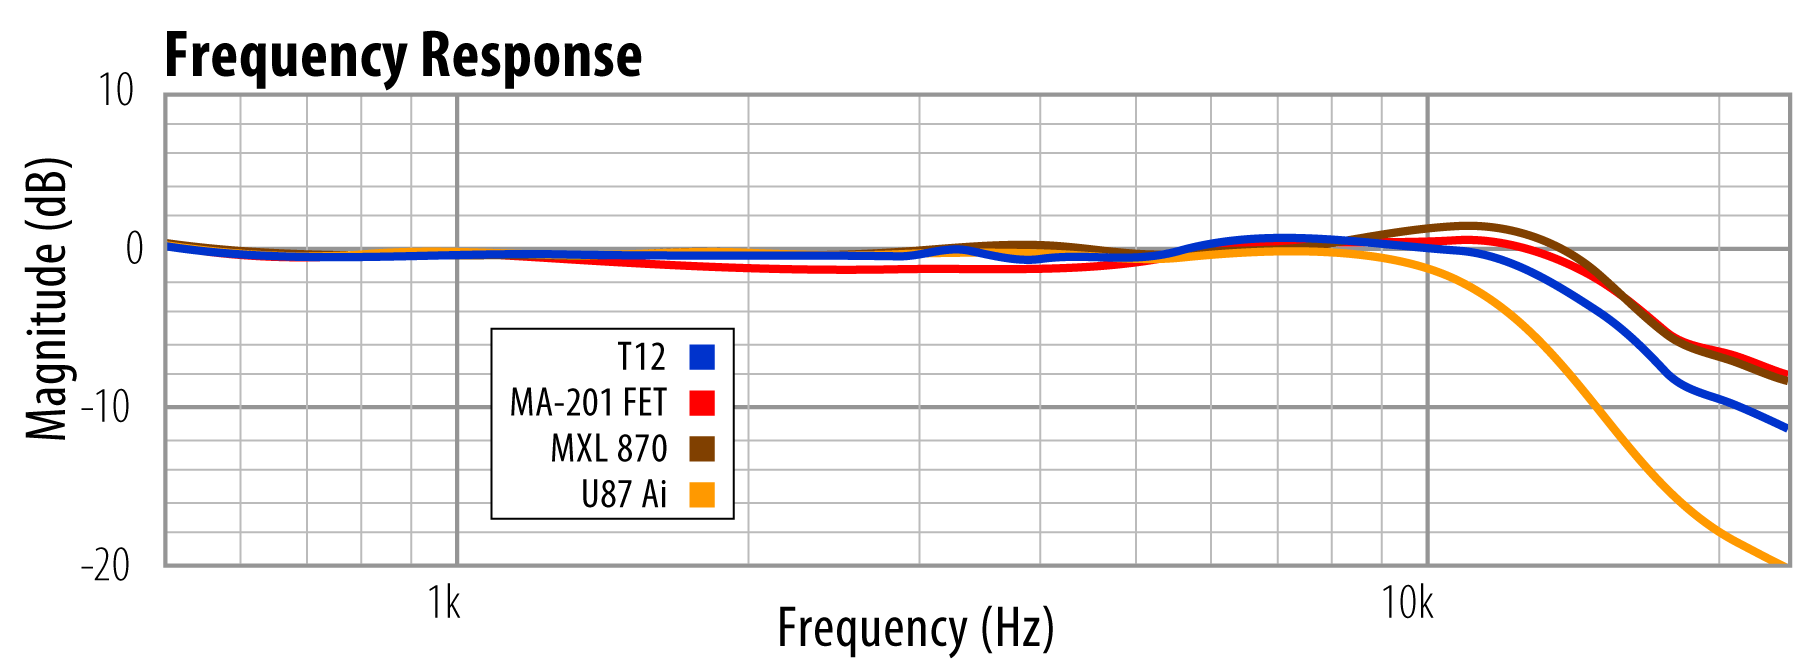 T12 Frequency Response Comparison